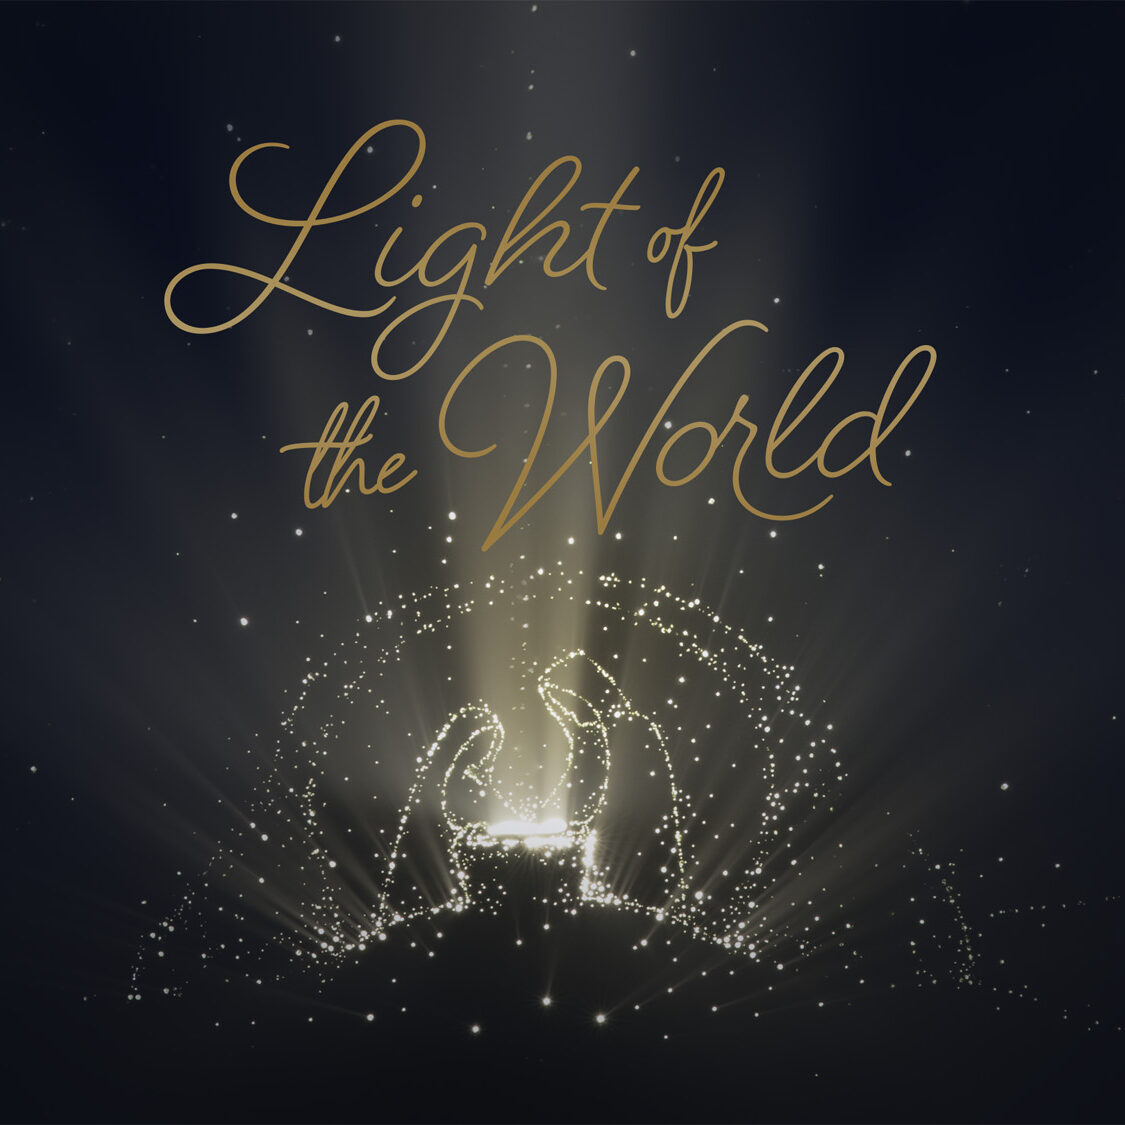 light_of_the_world-title-1-Wide 16x9